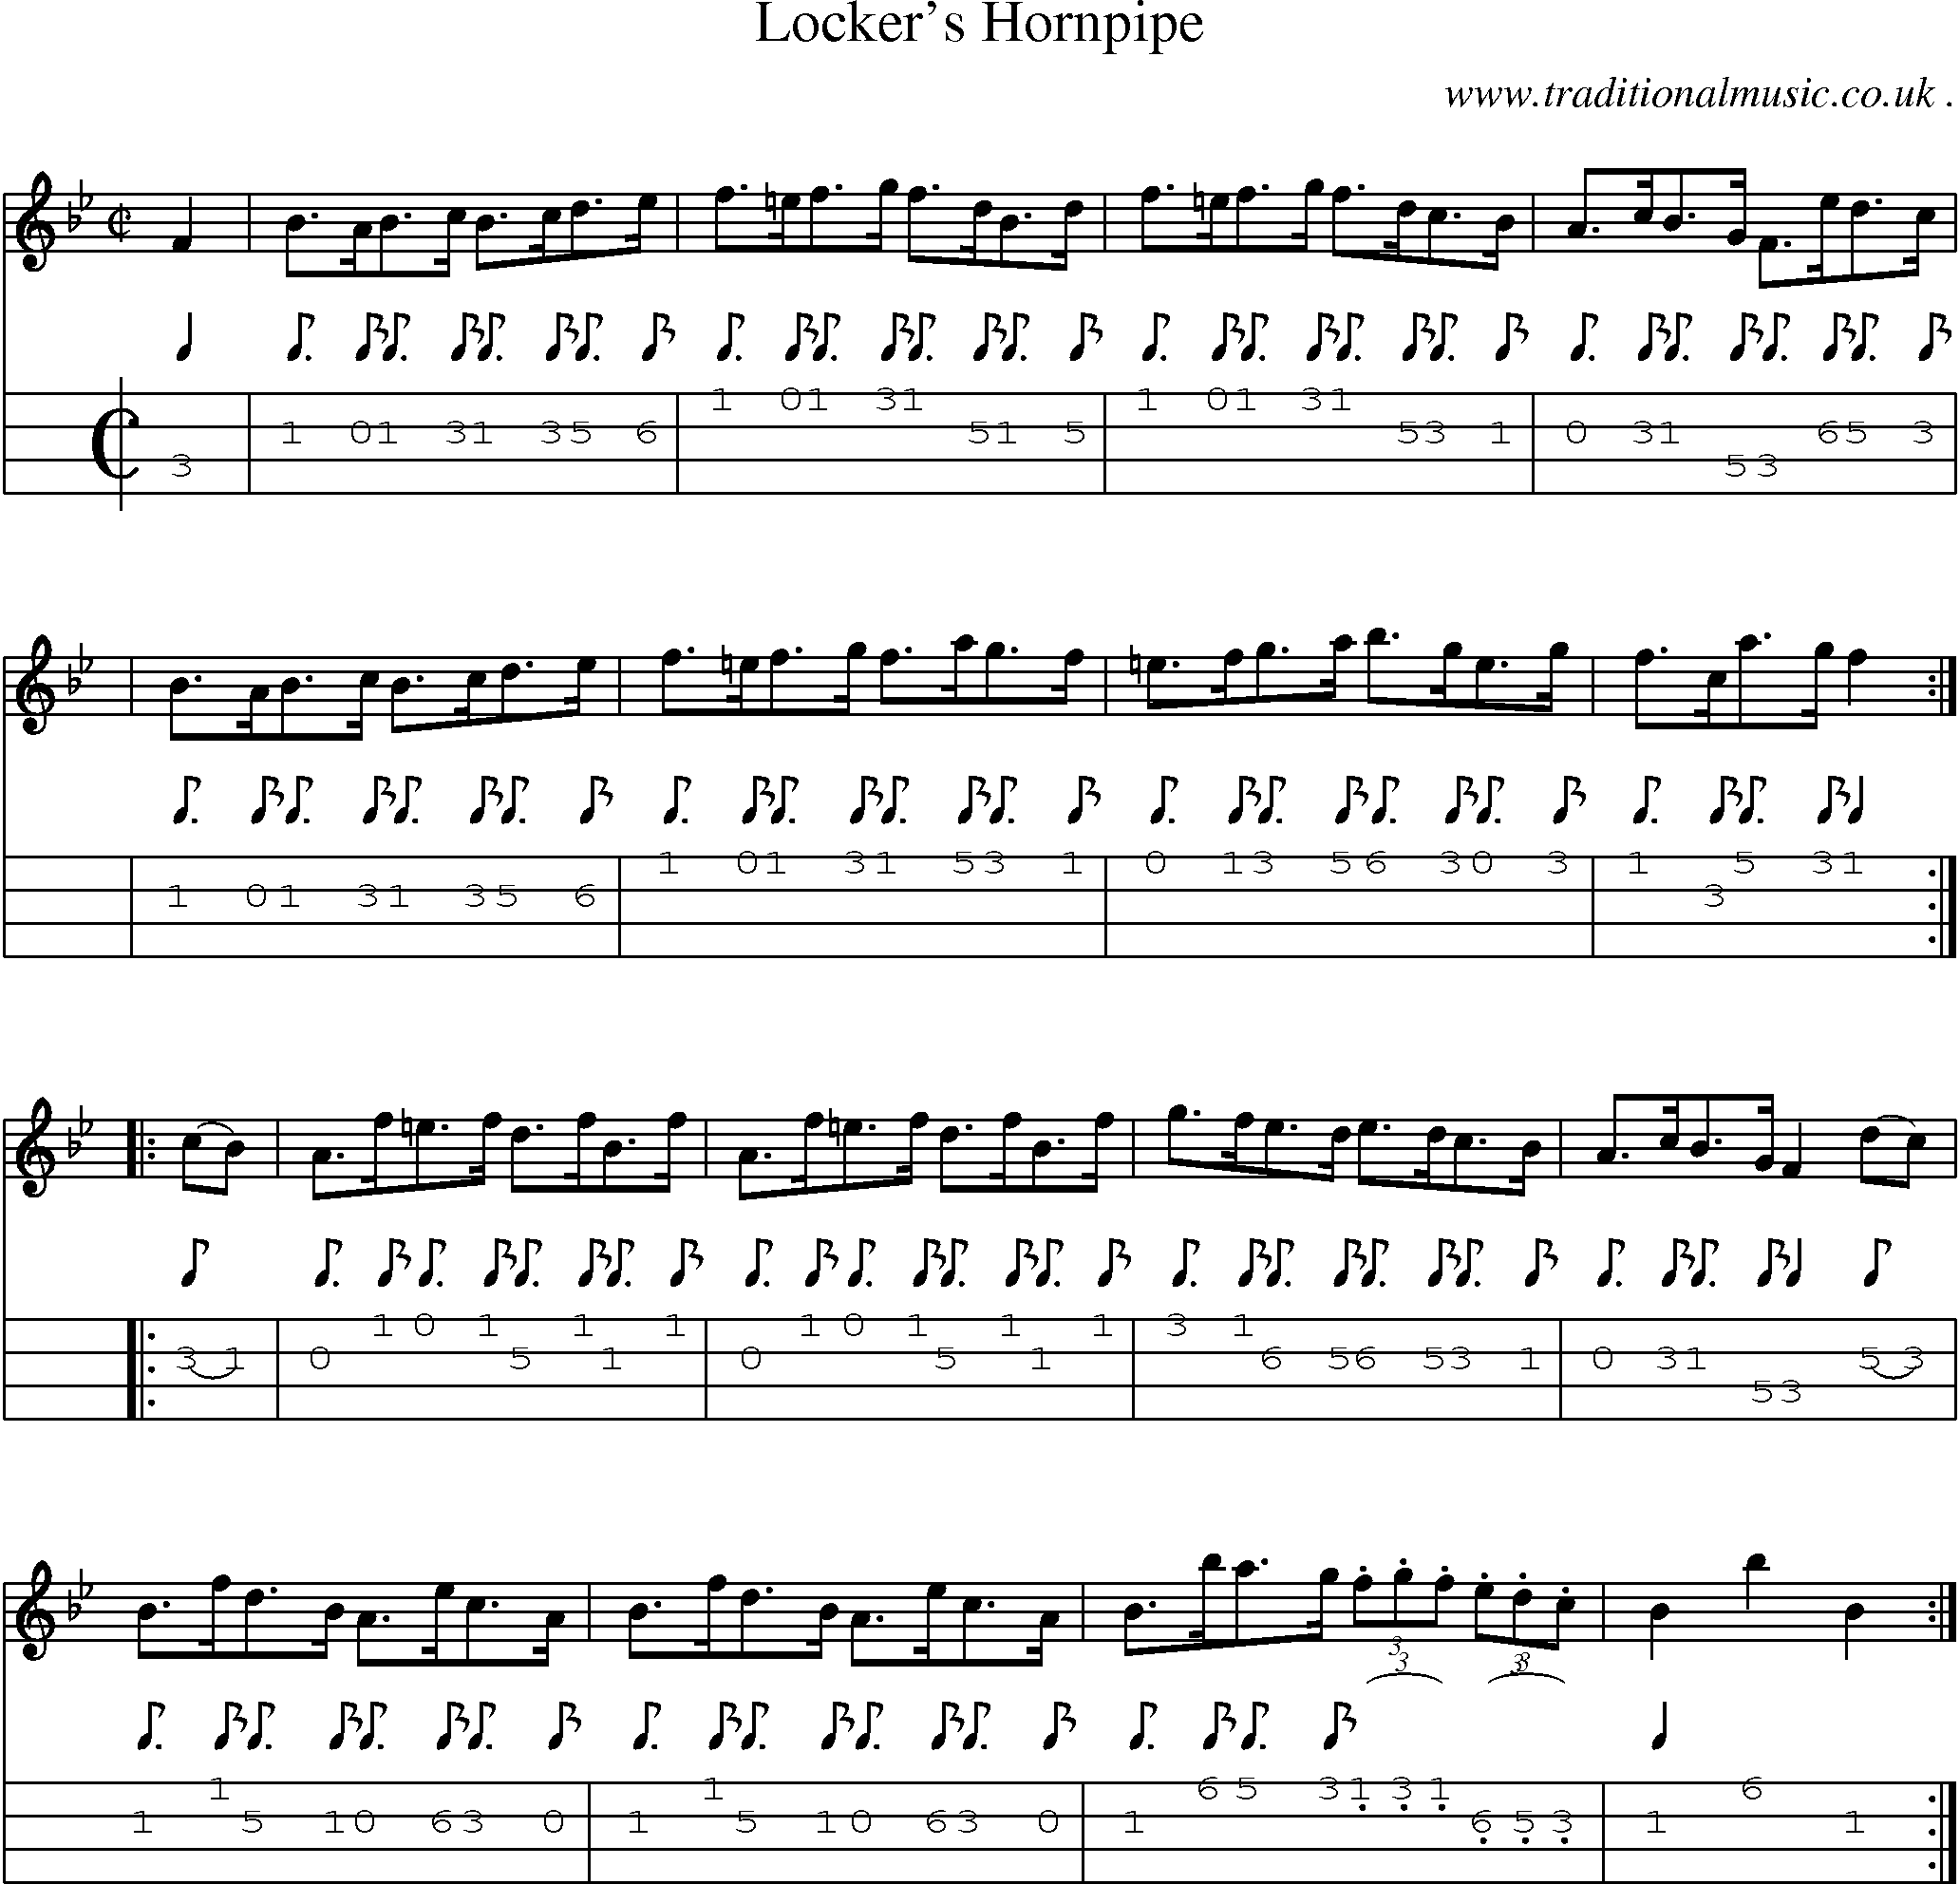 Sheet-Music and Mandolin Tabs for Lockers Hornpipe